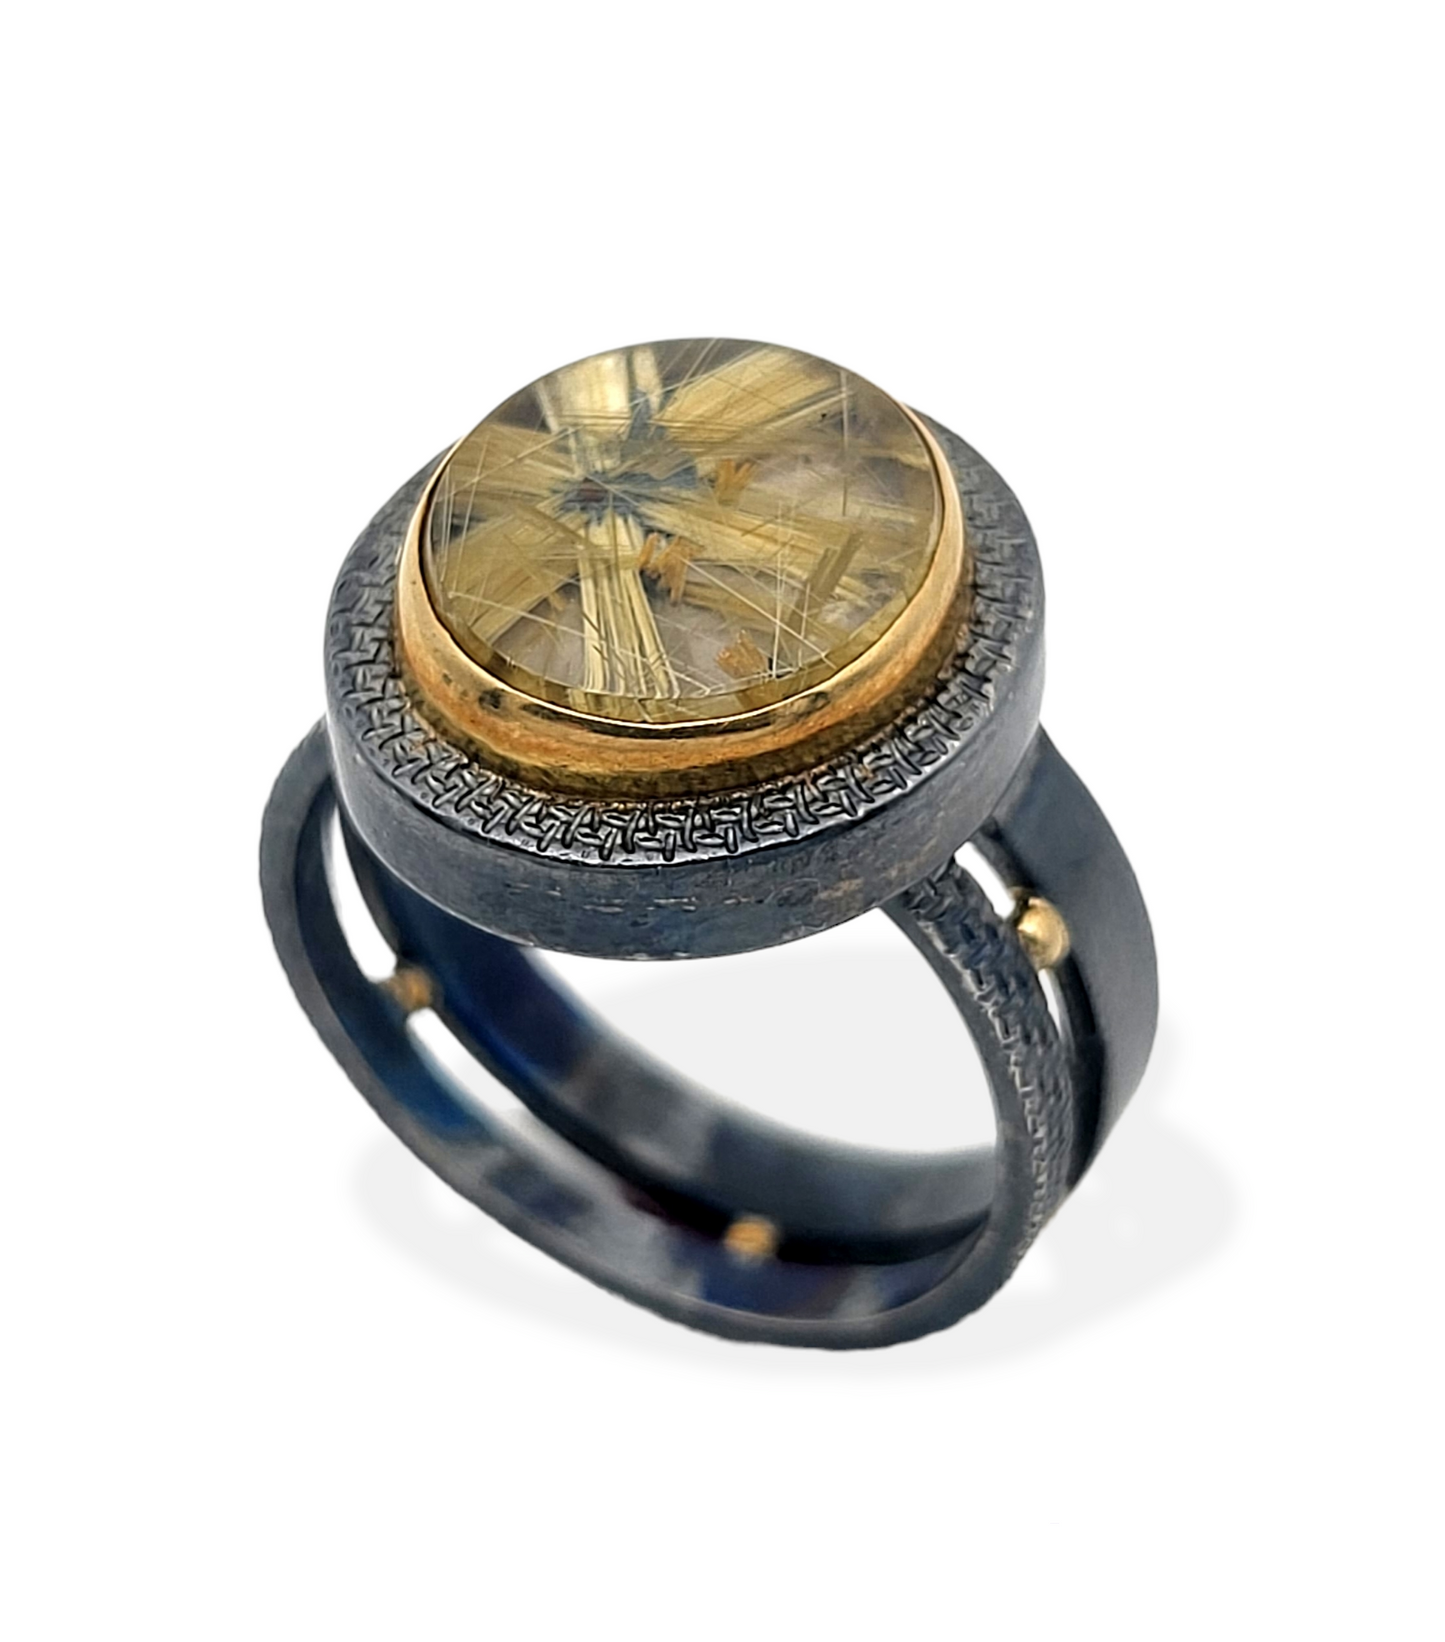 Oxidized Sterling Silver Ring with Rutilated Quartz and Gold Highlights